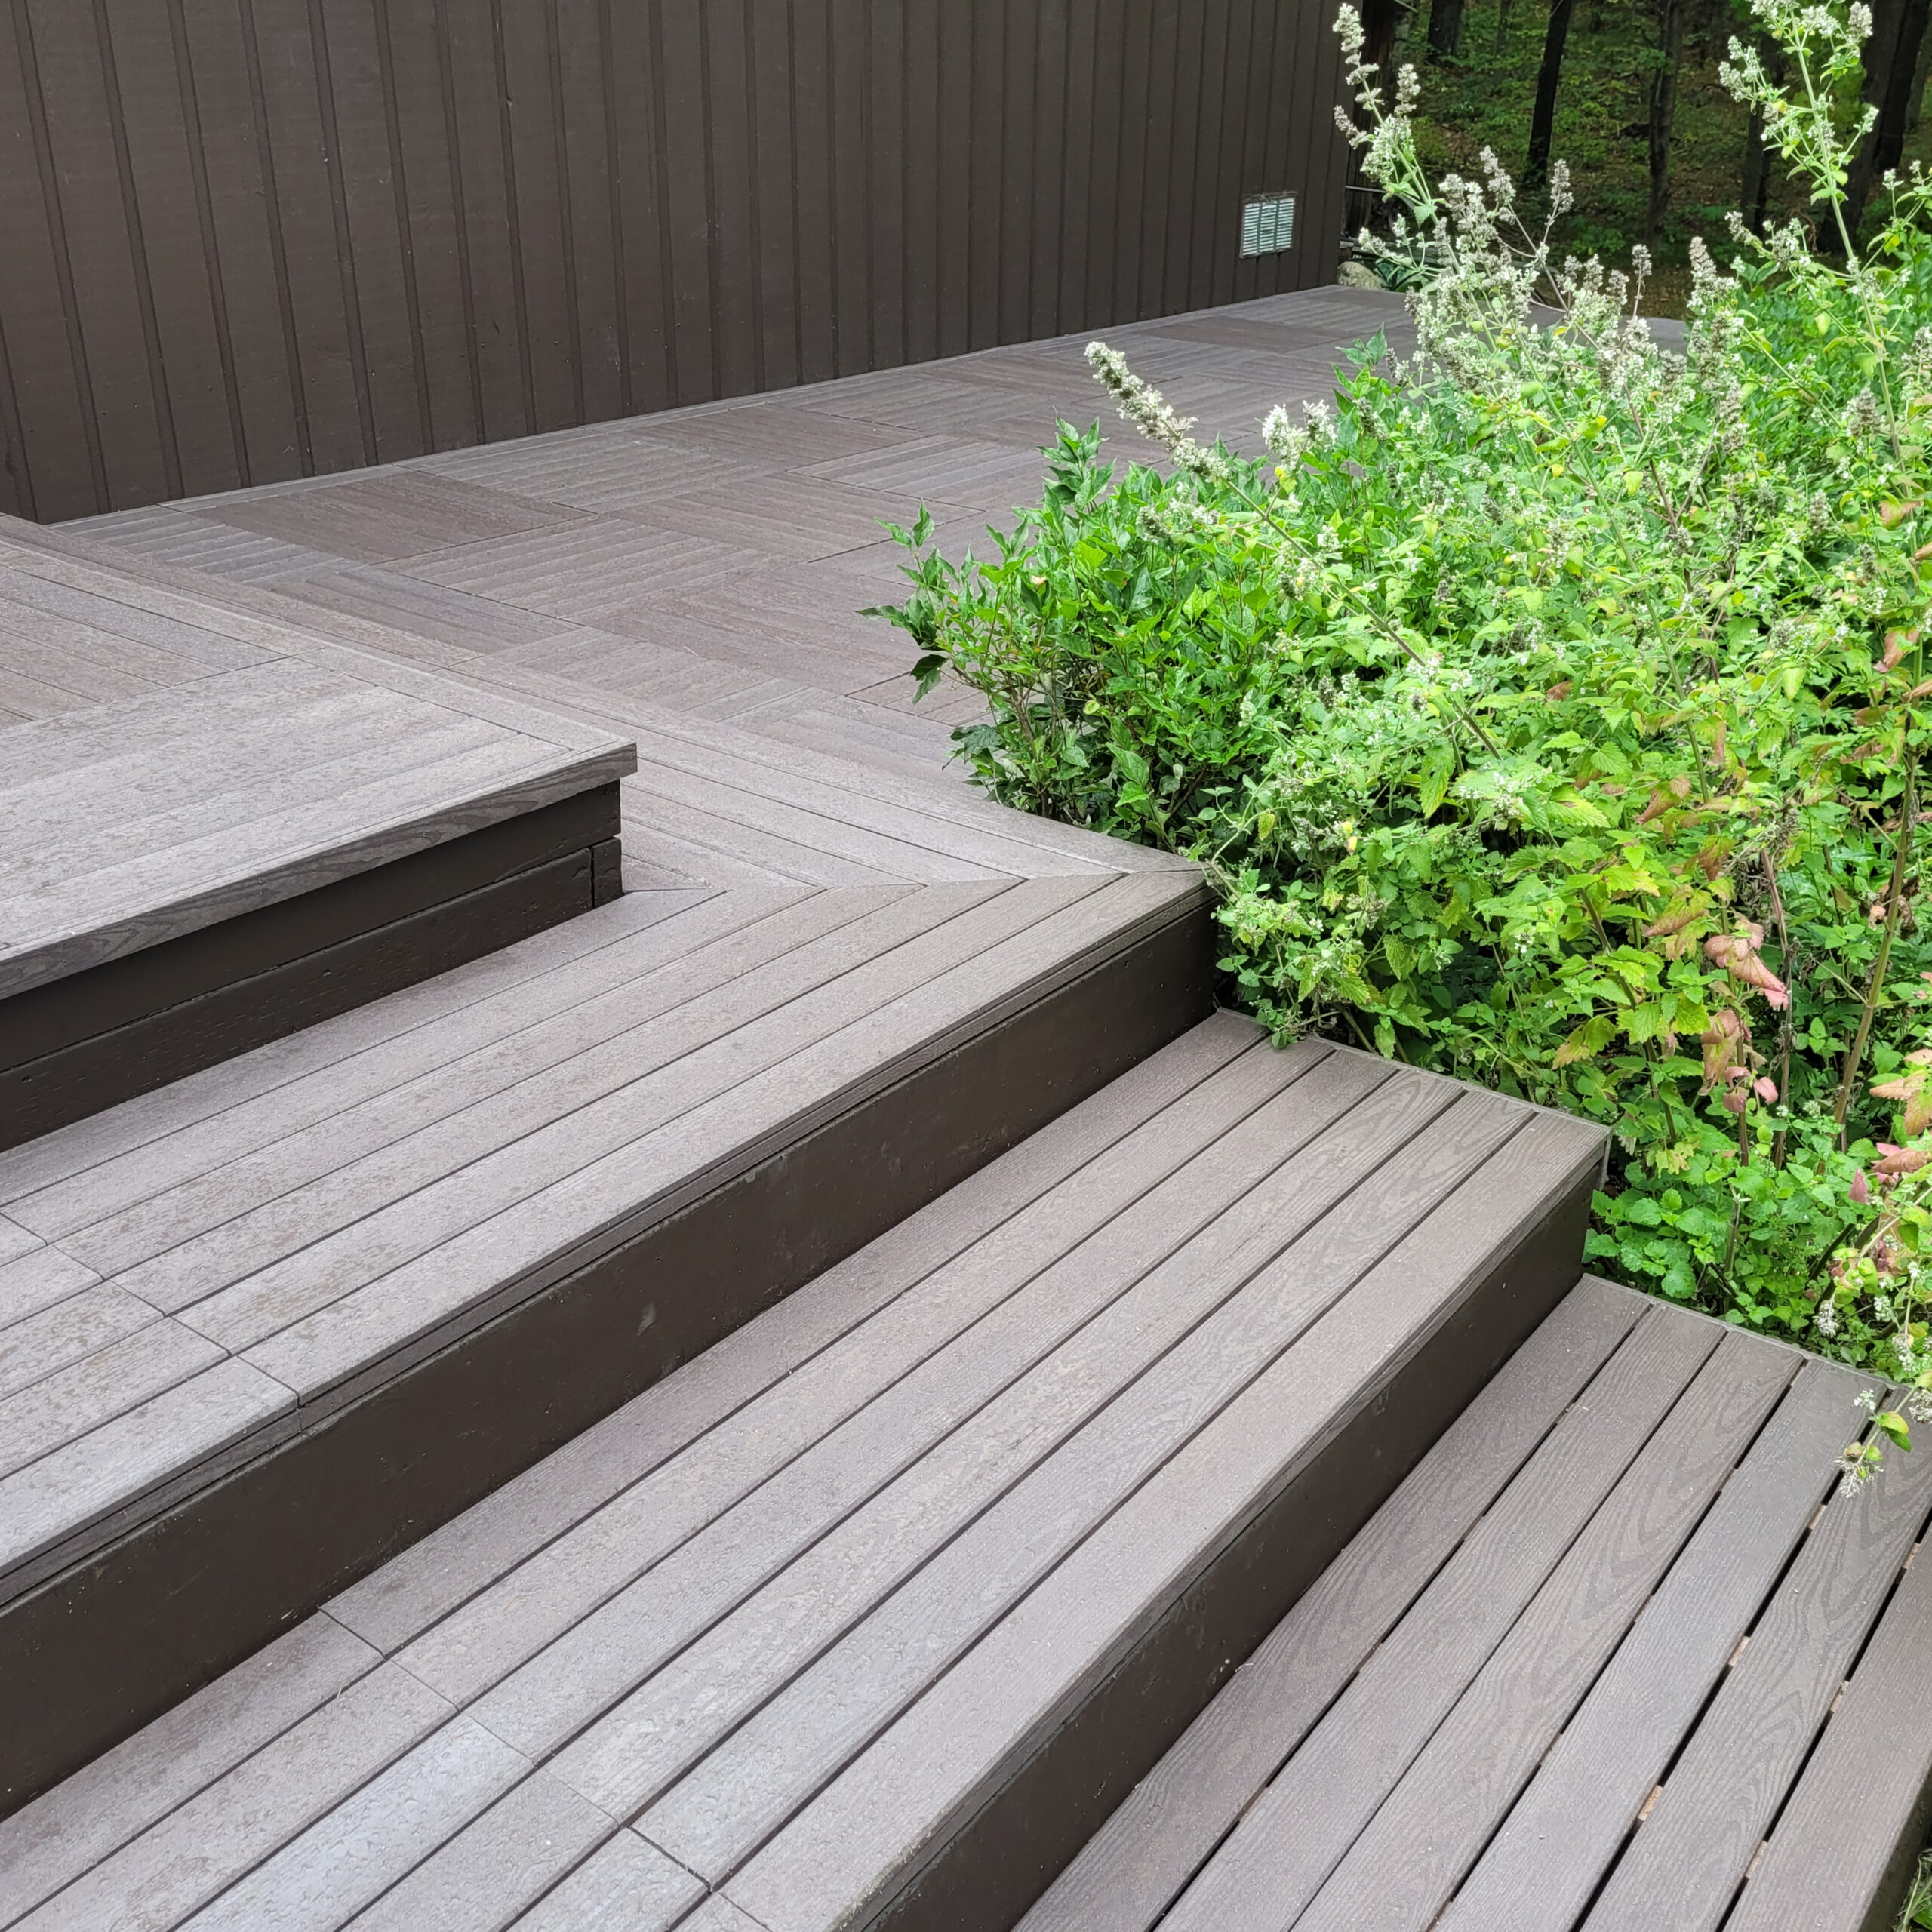 Elevating Existing Deck Structures with Deck Tiles